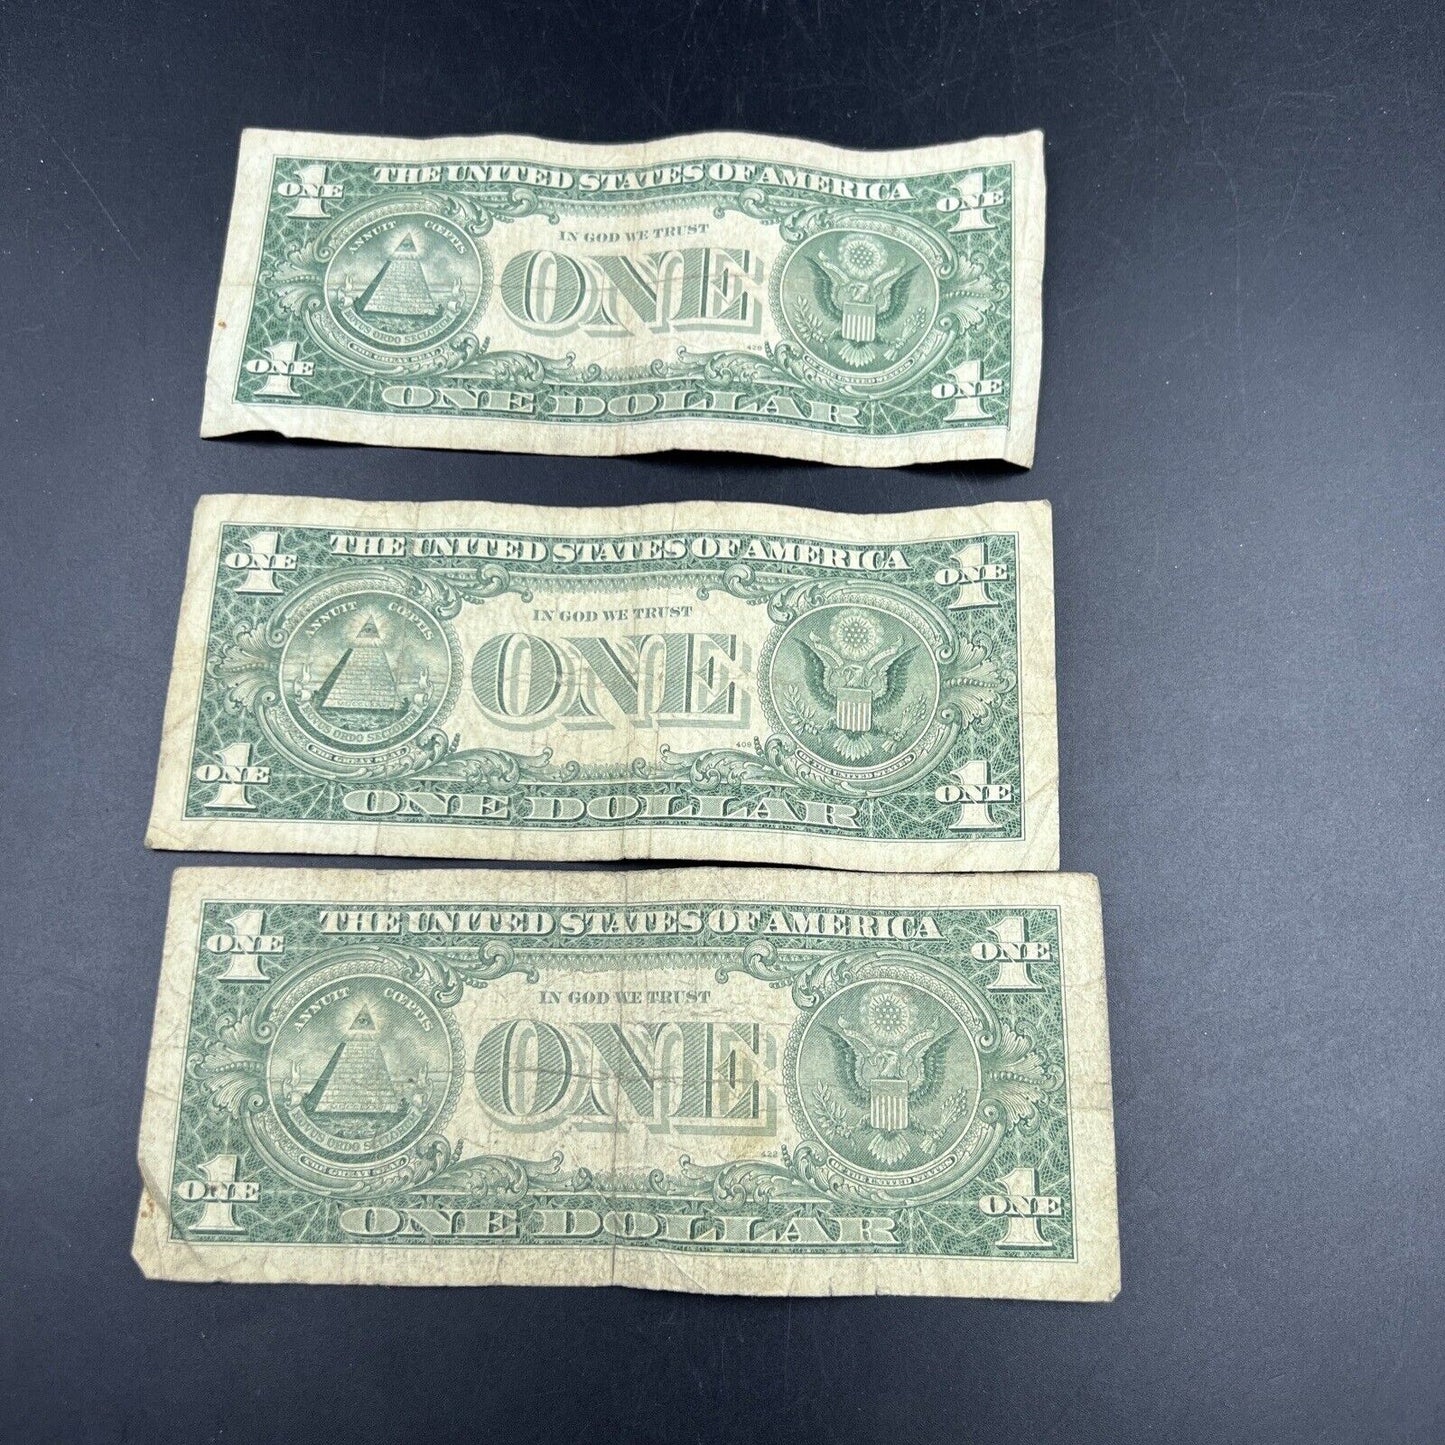 Lot of 3 1957 $1 One Dollar Silver Certificate Blue Seal Note Bills Very Circ 36